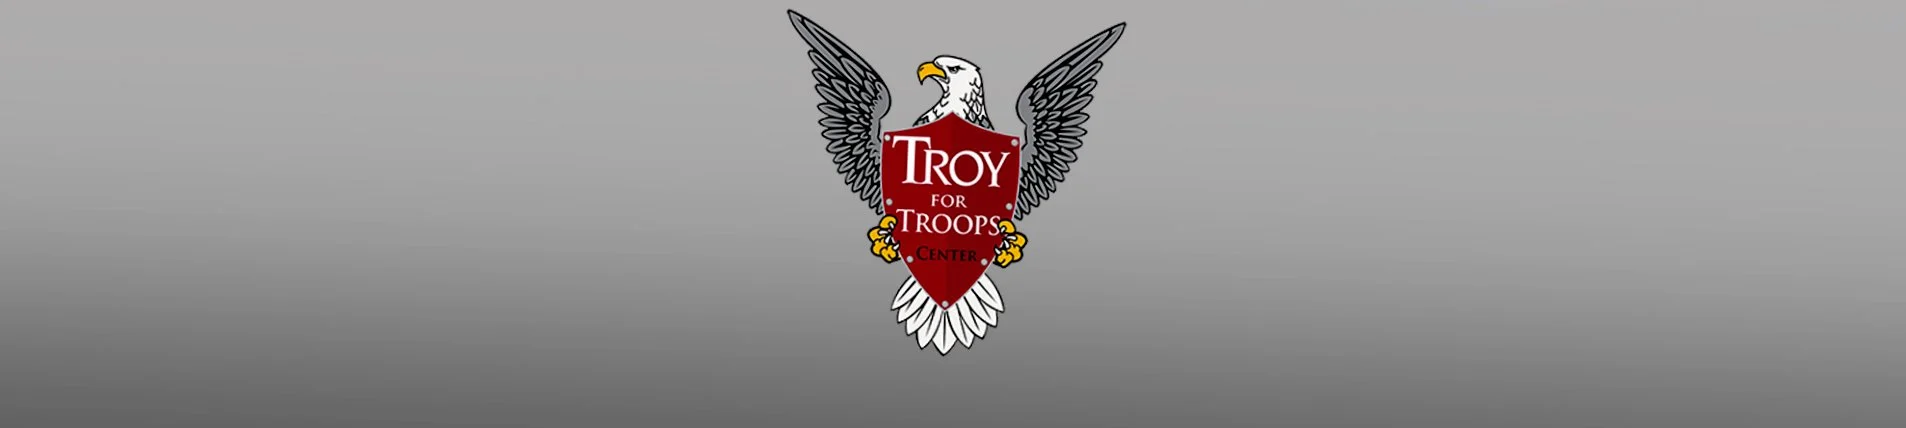 Troy University Recognizes the Month of November as National Military Family Month